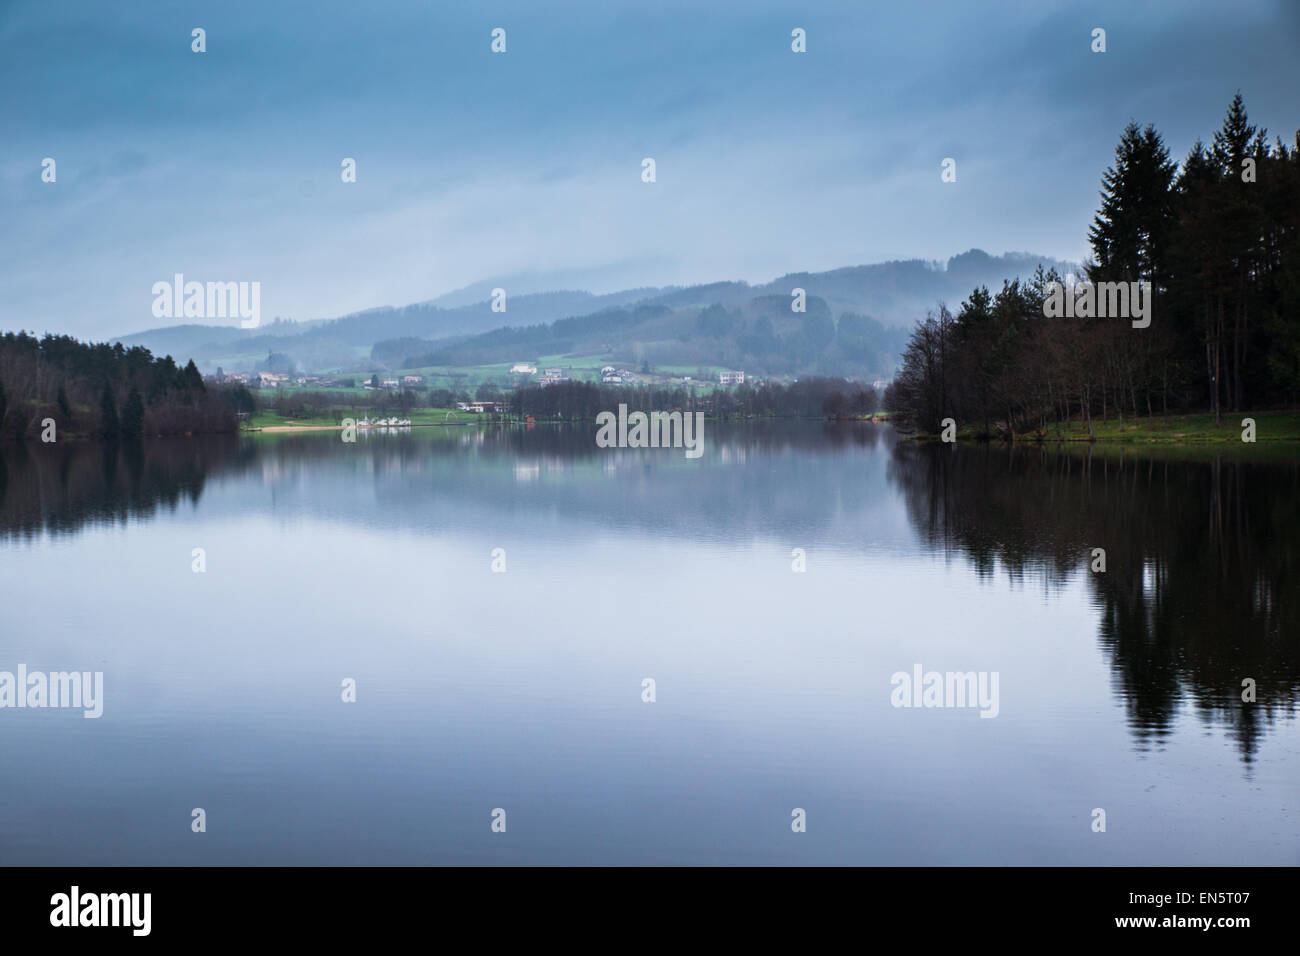 View of Aubusson lake in Aubusson d'Auvergne, a small village in France. Stock Photo